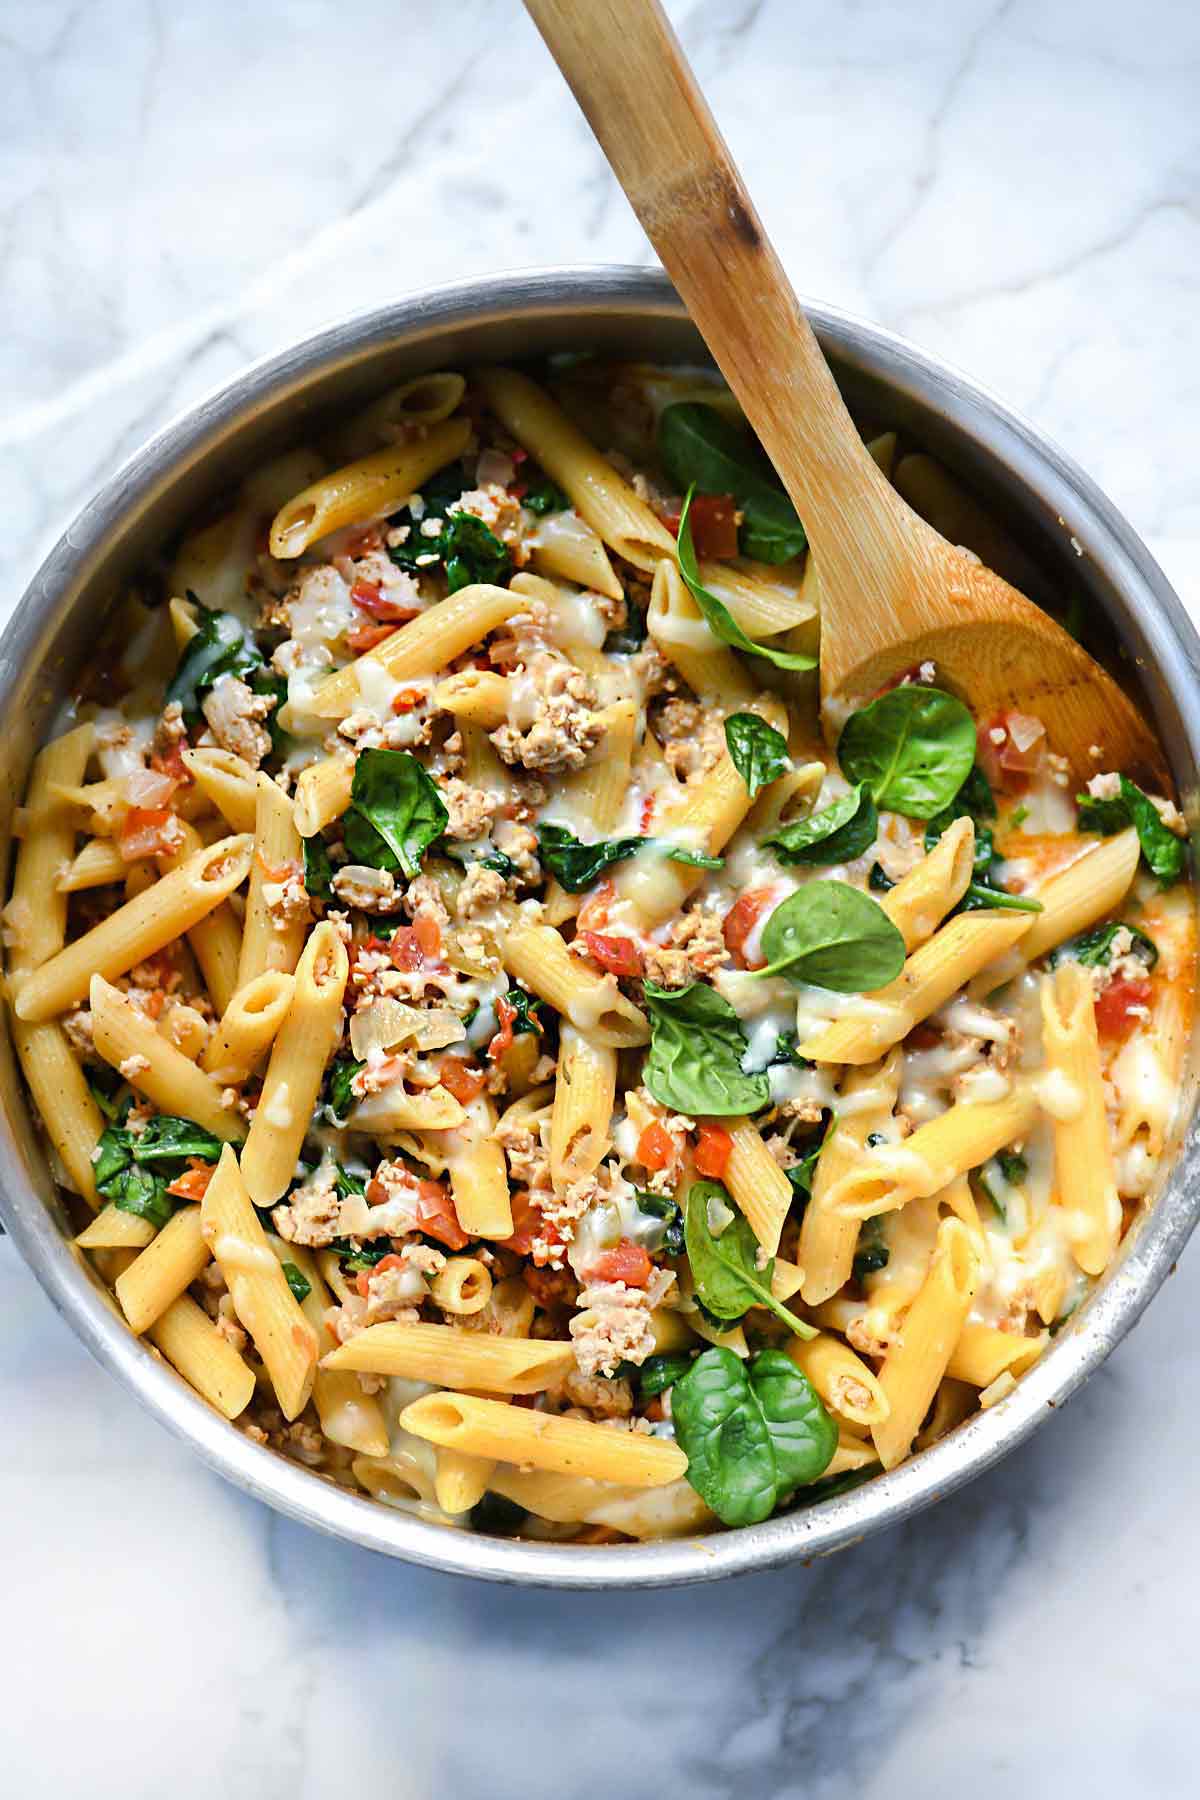 https://www.foodiecrush.com/wp-content/uploads/2018/03/Penne-Pasta-with-Turkey-and-Spinach-foodiecrush.com-003.jpg